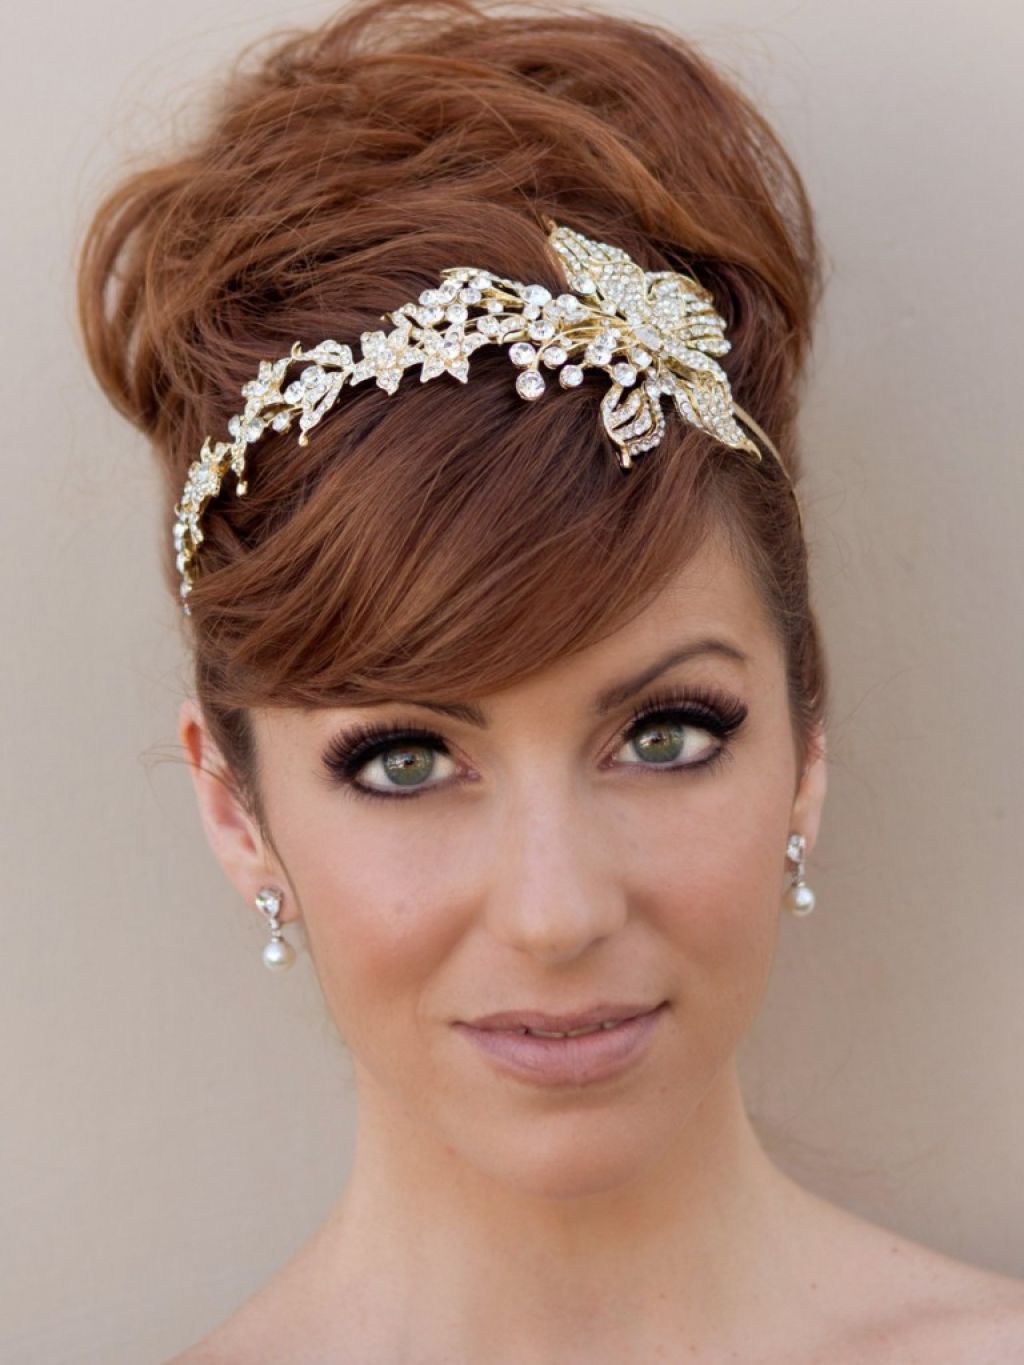 60+ Wedding & Bridal Hairstyle Ideas, Trends & Inspiration ...